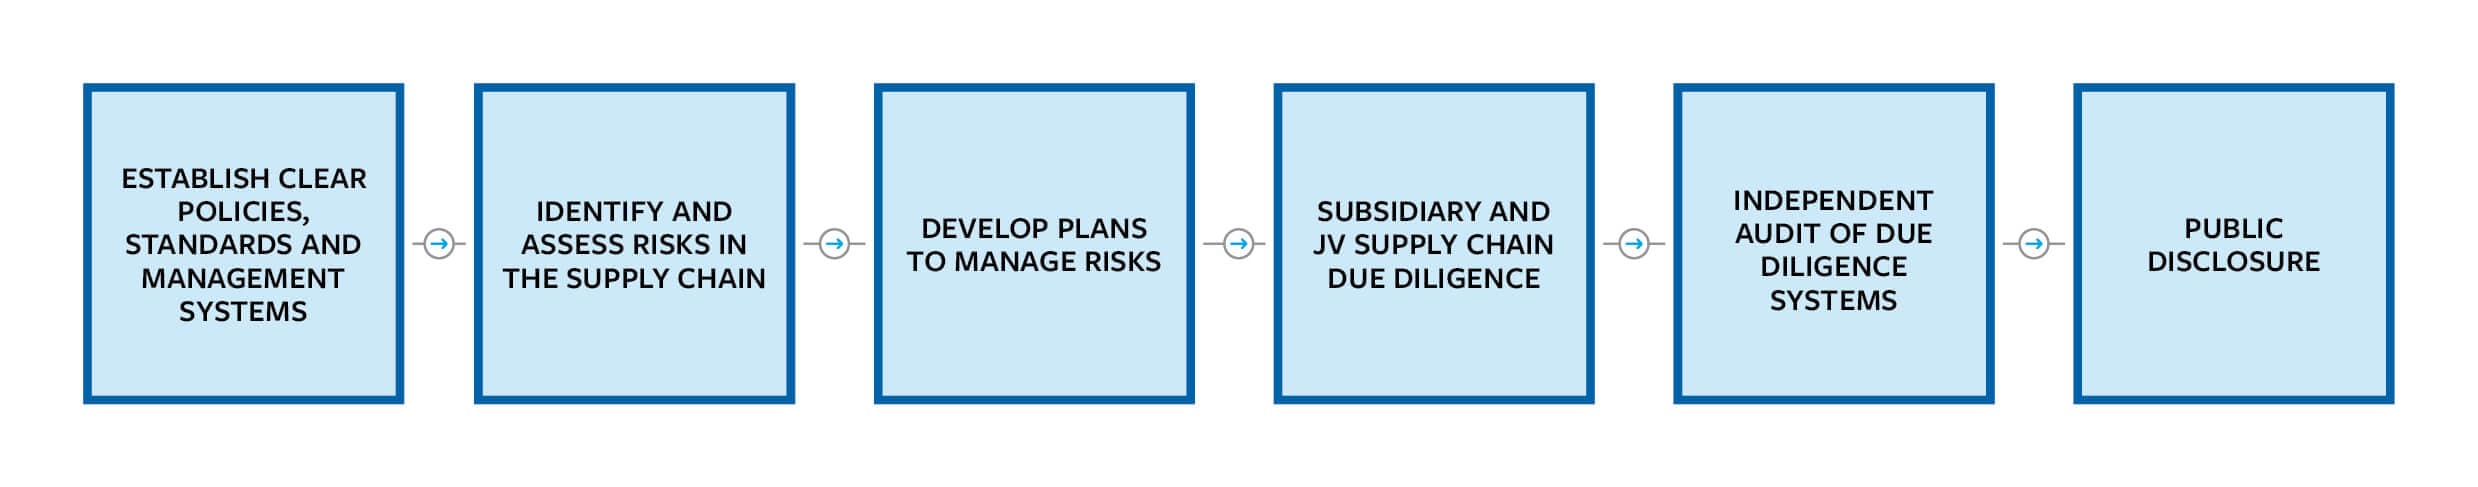 Sherritt’s approach follows this path: Establish clear policies, standards and management systems > Identify and assess risks in the supply chain > Develop plans to manage risks > Subsidiary and joint venture supply chain due diligence > Independent audit of due diligence systems > Public disclosure